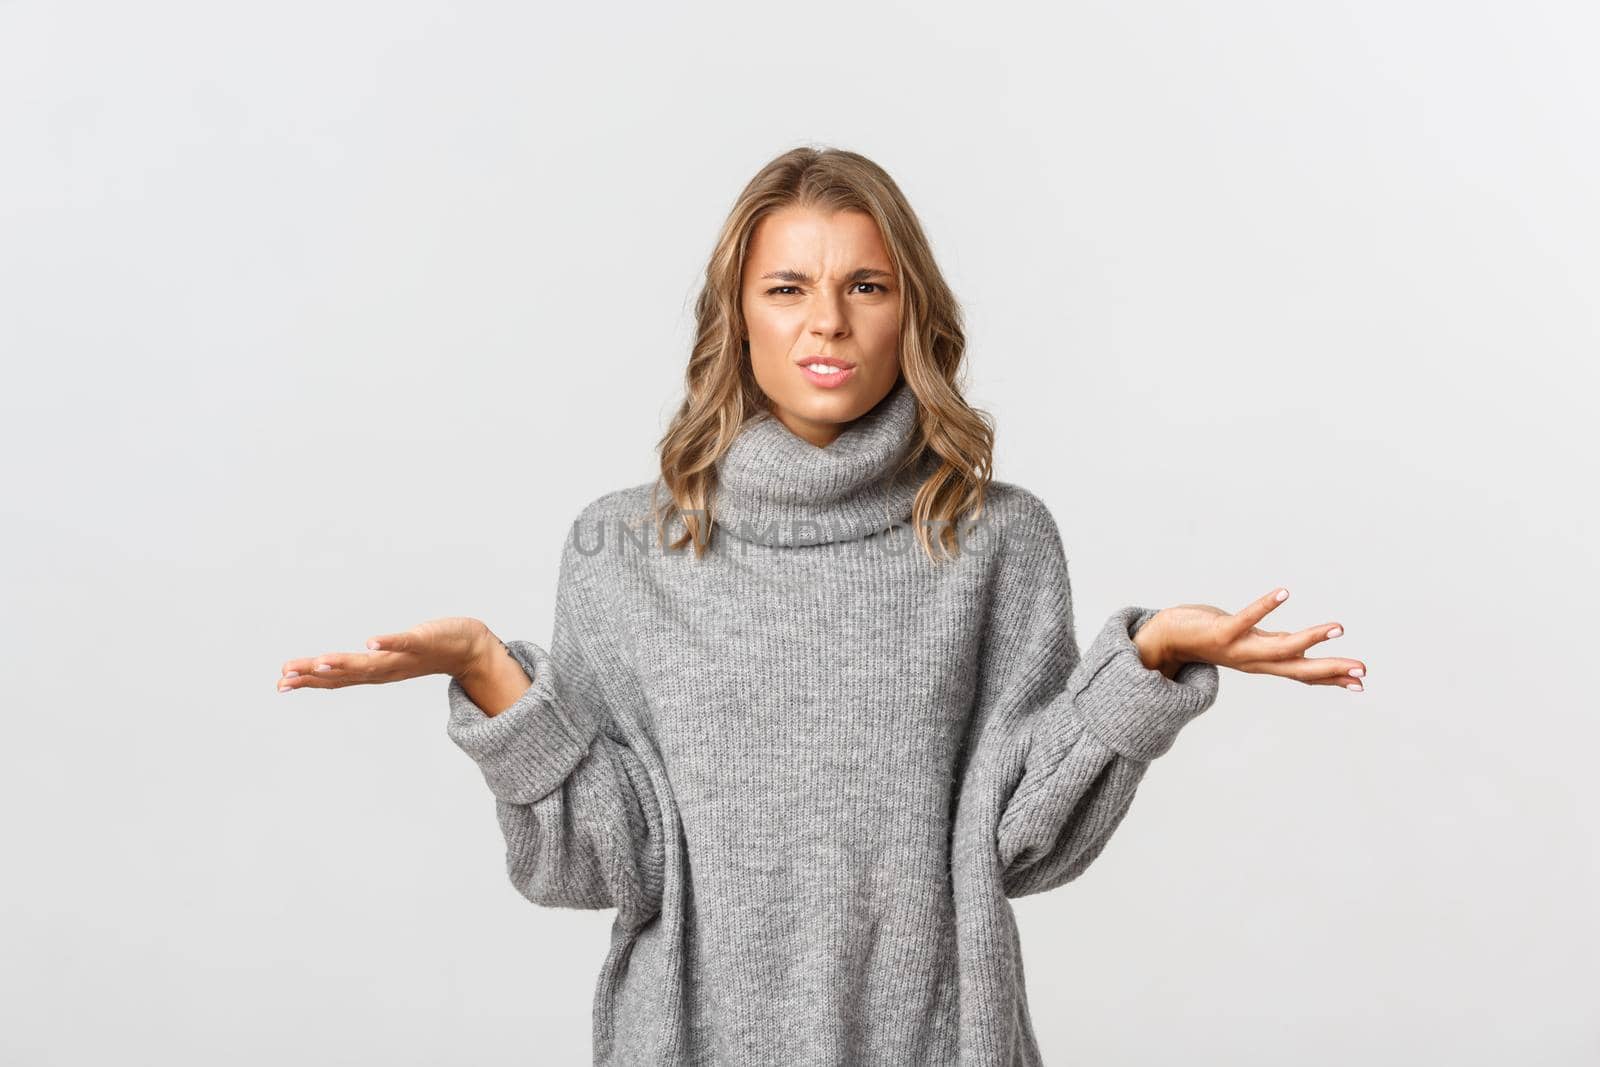 Portrait of confused blond woman grimacing puzzled and shrugging, dont know whats happening, standing over white background.